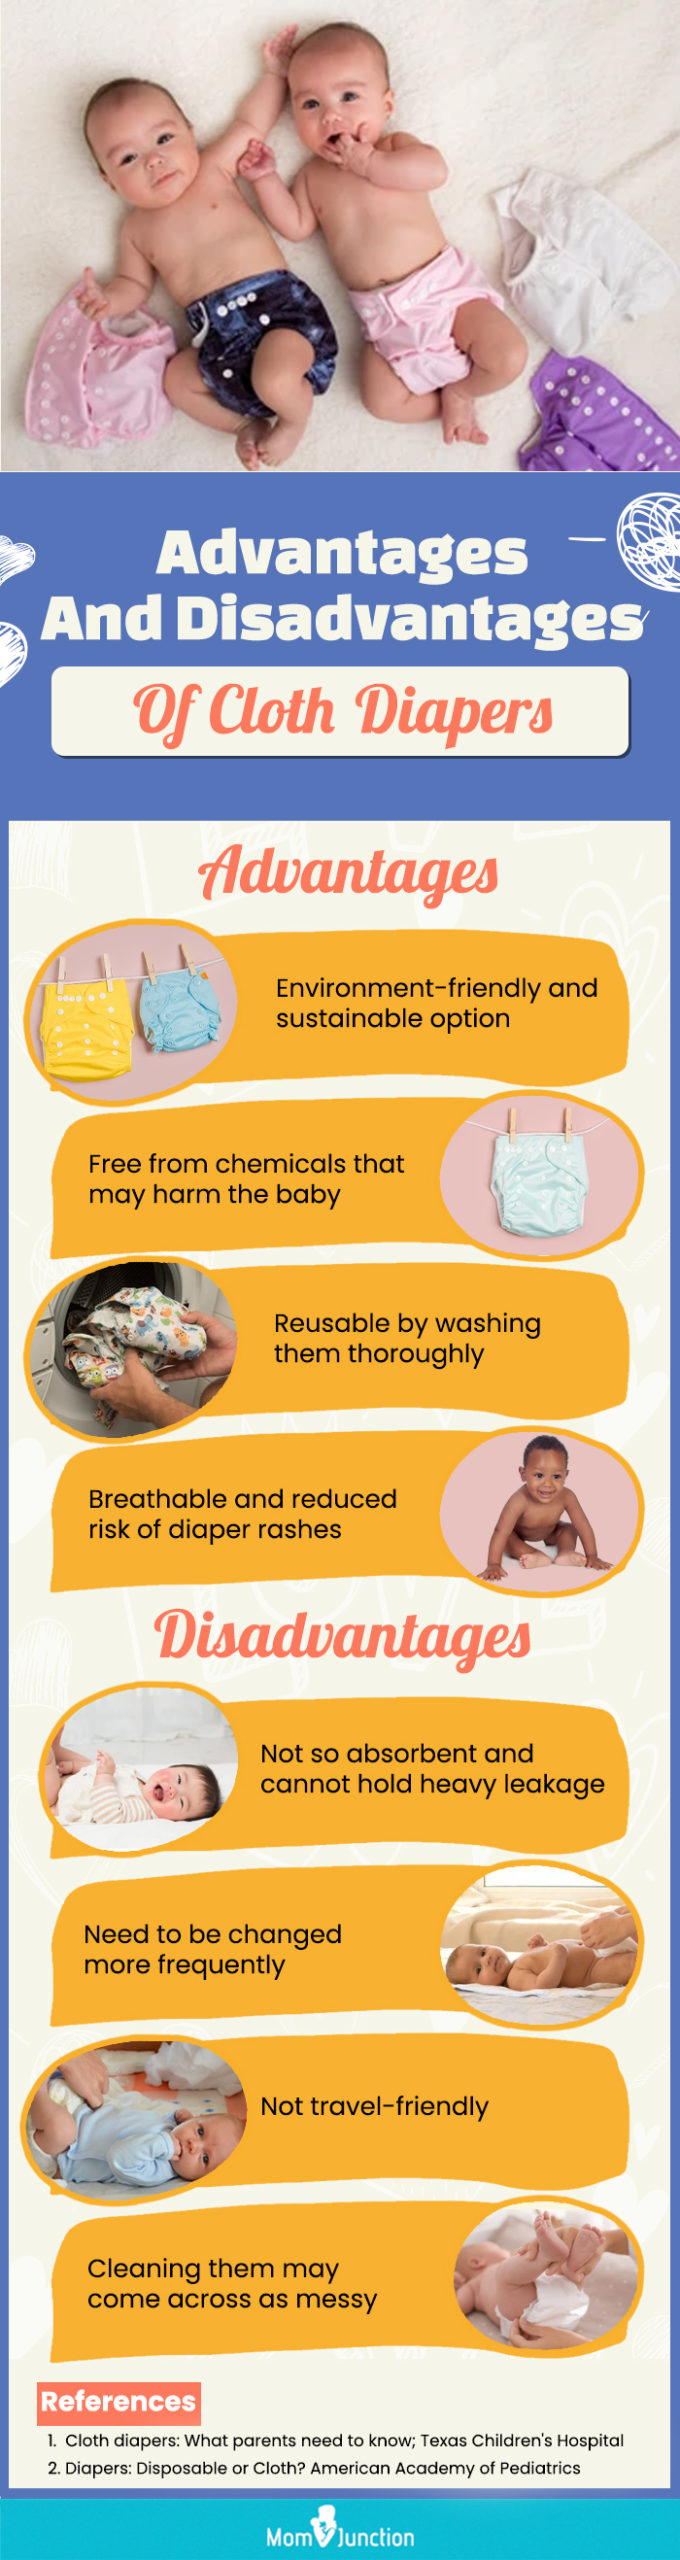 Advantages And Disadvantages Of Cloth Diapers (infographic)